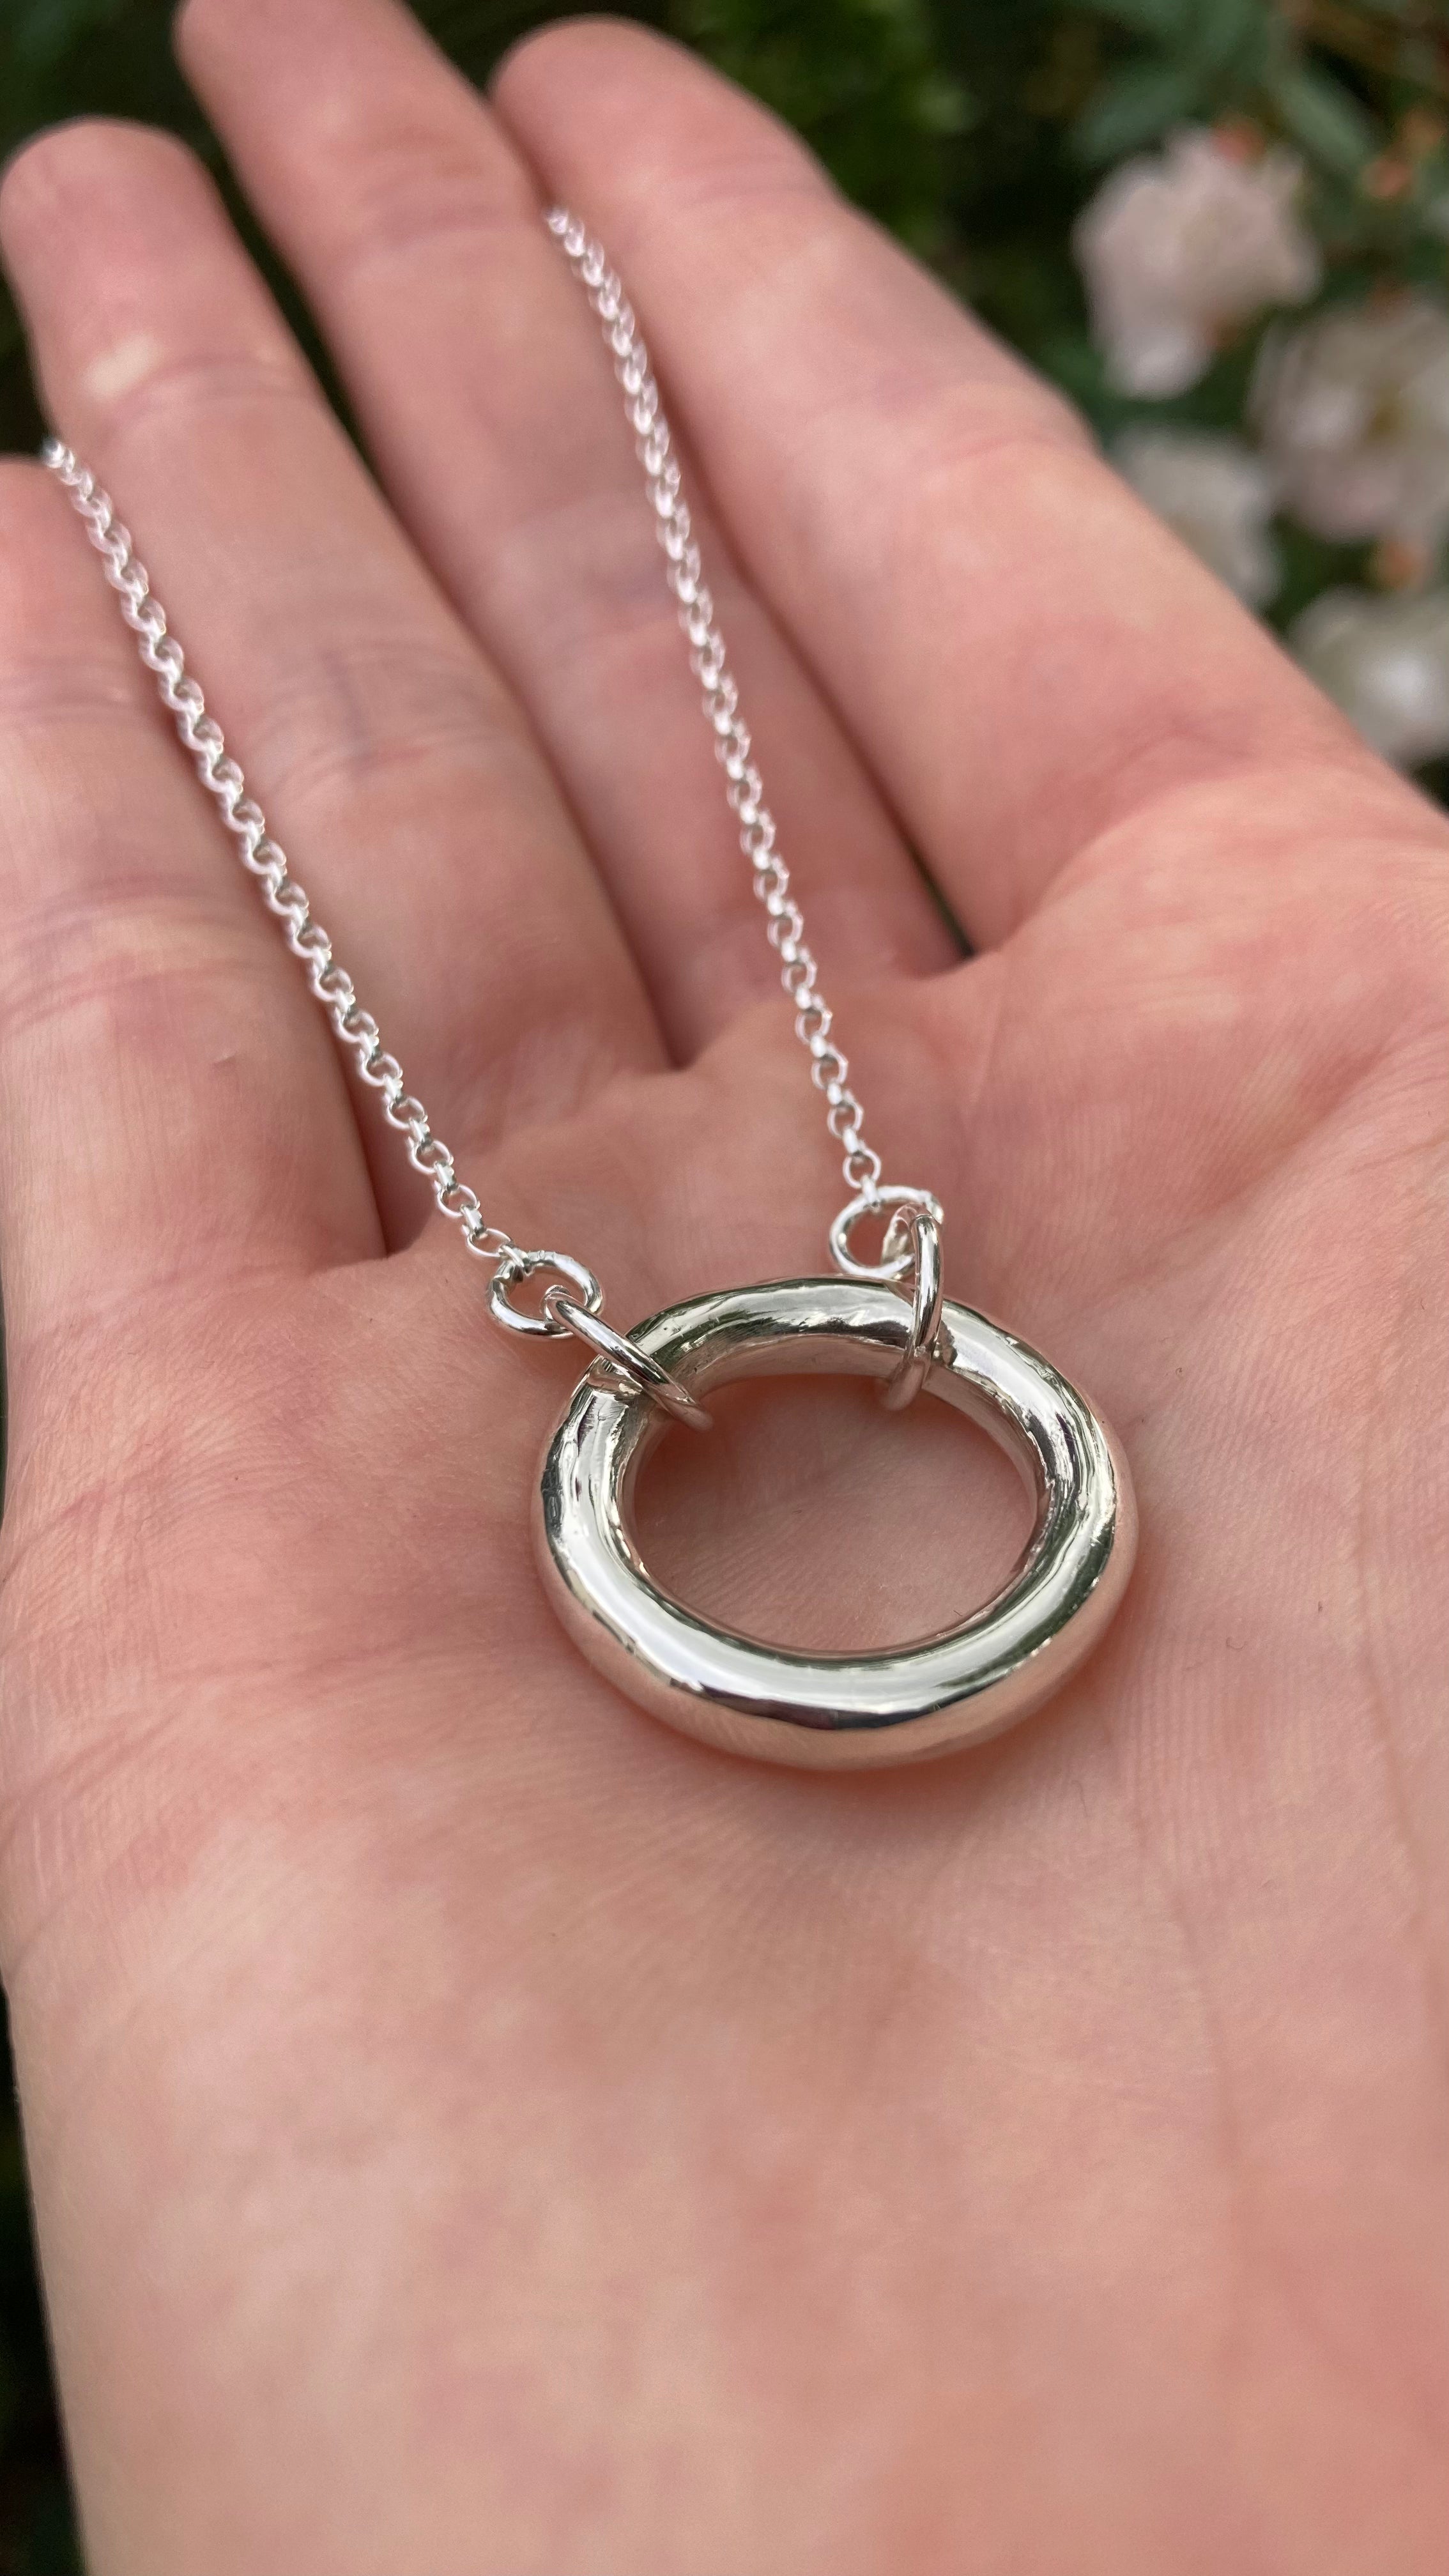 SACRED CIRCLE Handmade Sterling Silver Necklace